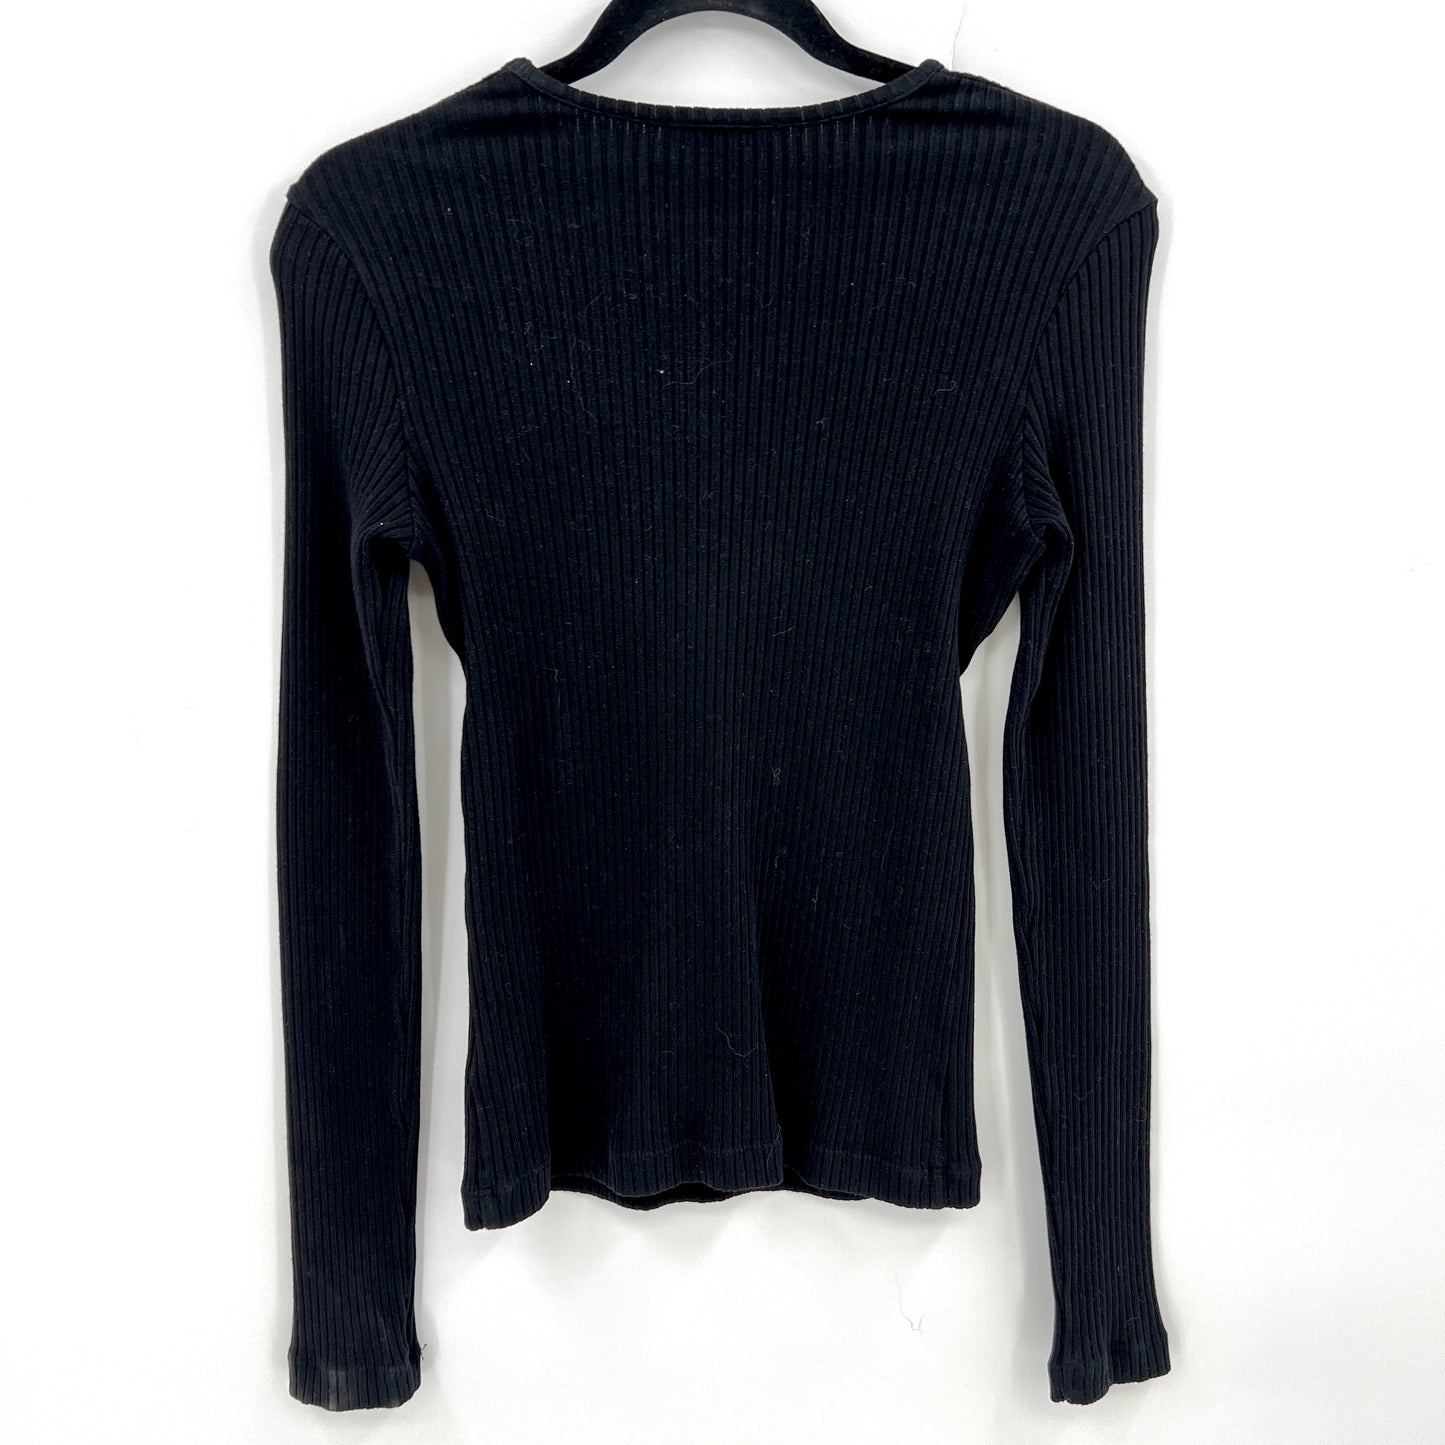 SOLD. Agolde Lyza Cut Out Long Sleeve Top M